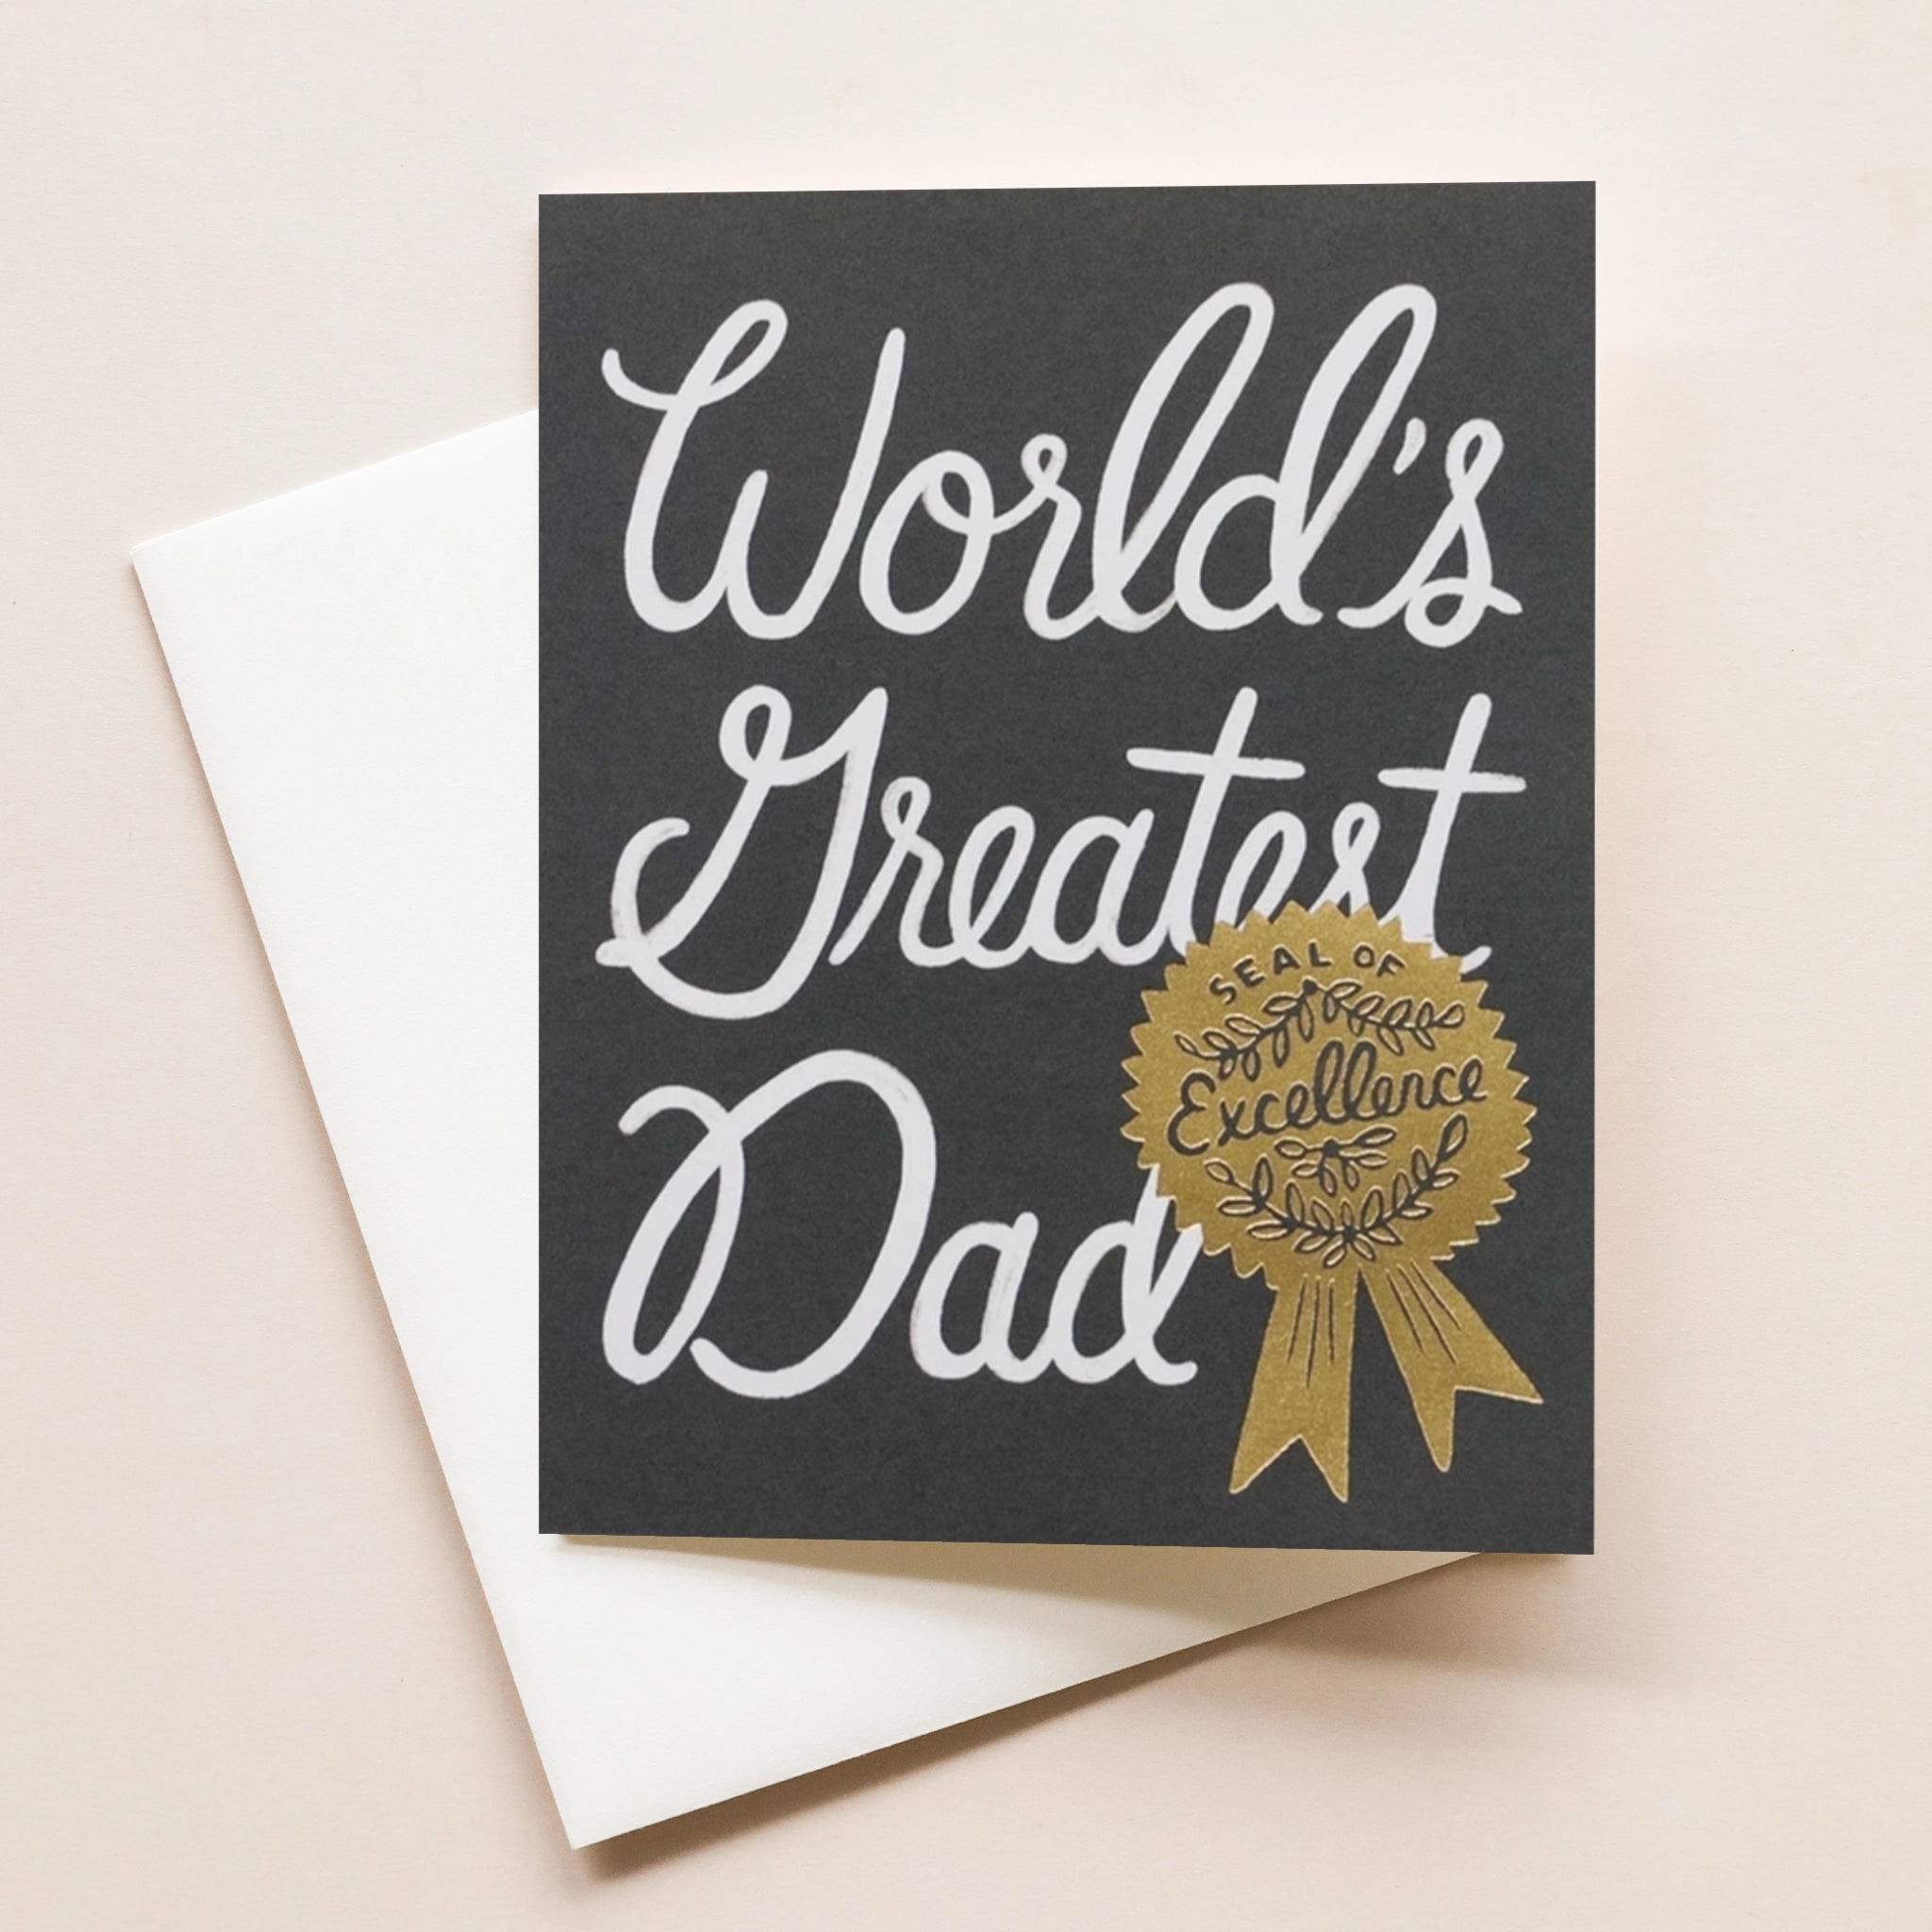 This card reads 'World's Greatest Dad' in white cursive over a black background. Along side the text is a metallic gold award-shaped 'Seal of Excellence'. The text is accompanied by a white envelope.